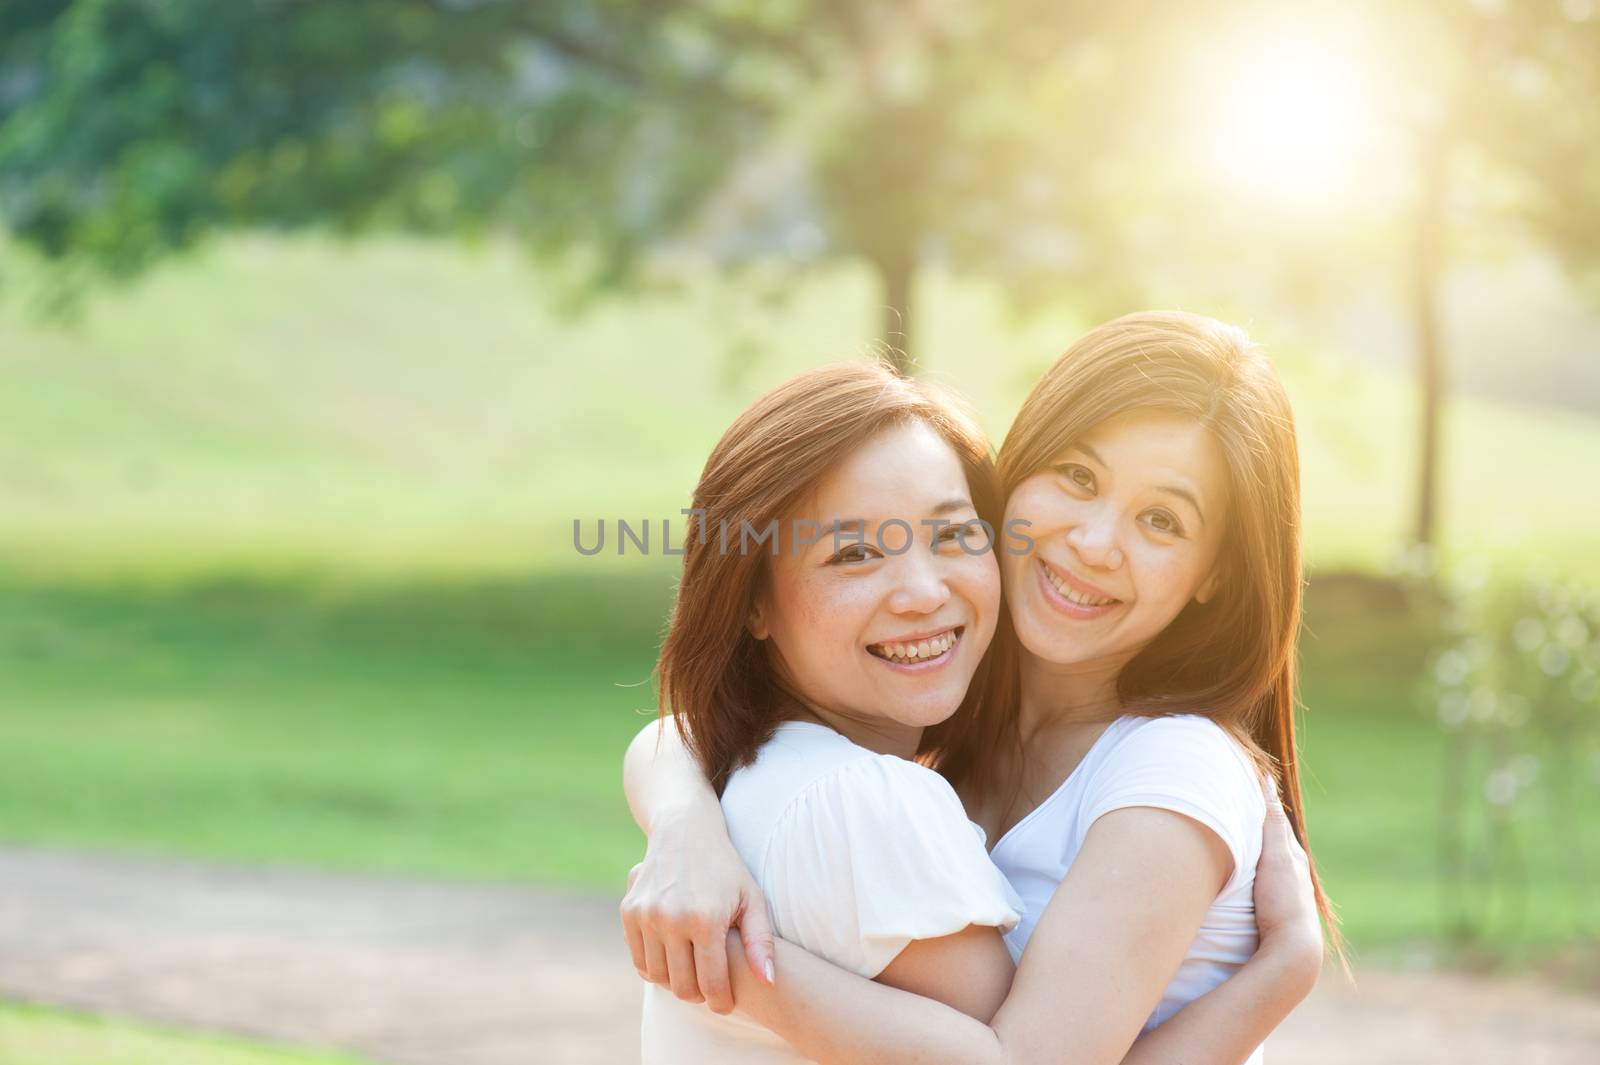 Young Asian sisters having fun at outdoor park, looking at camera and smiling, friendship concept, sun flare background.